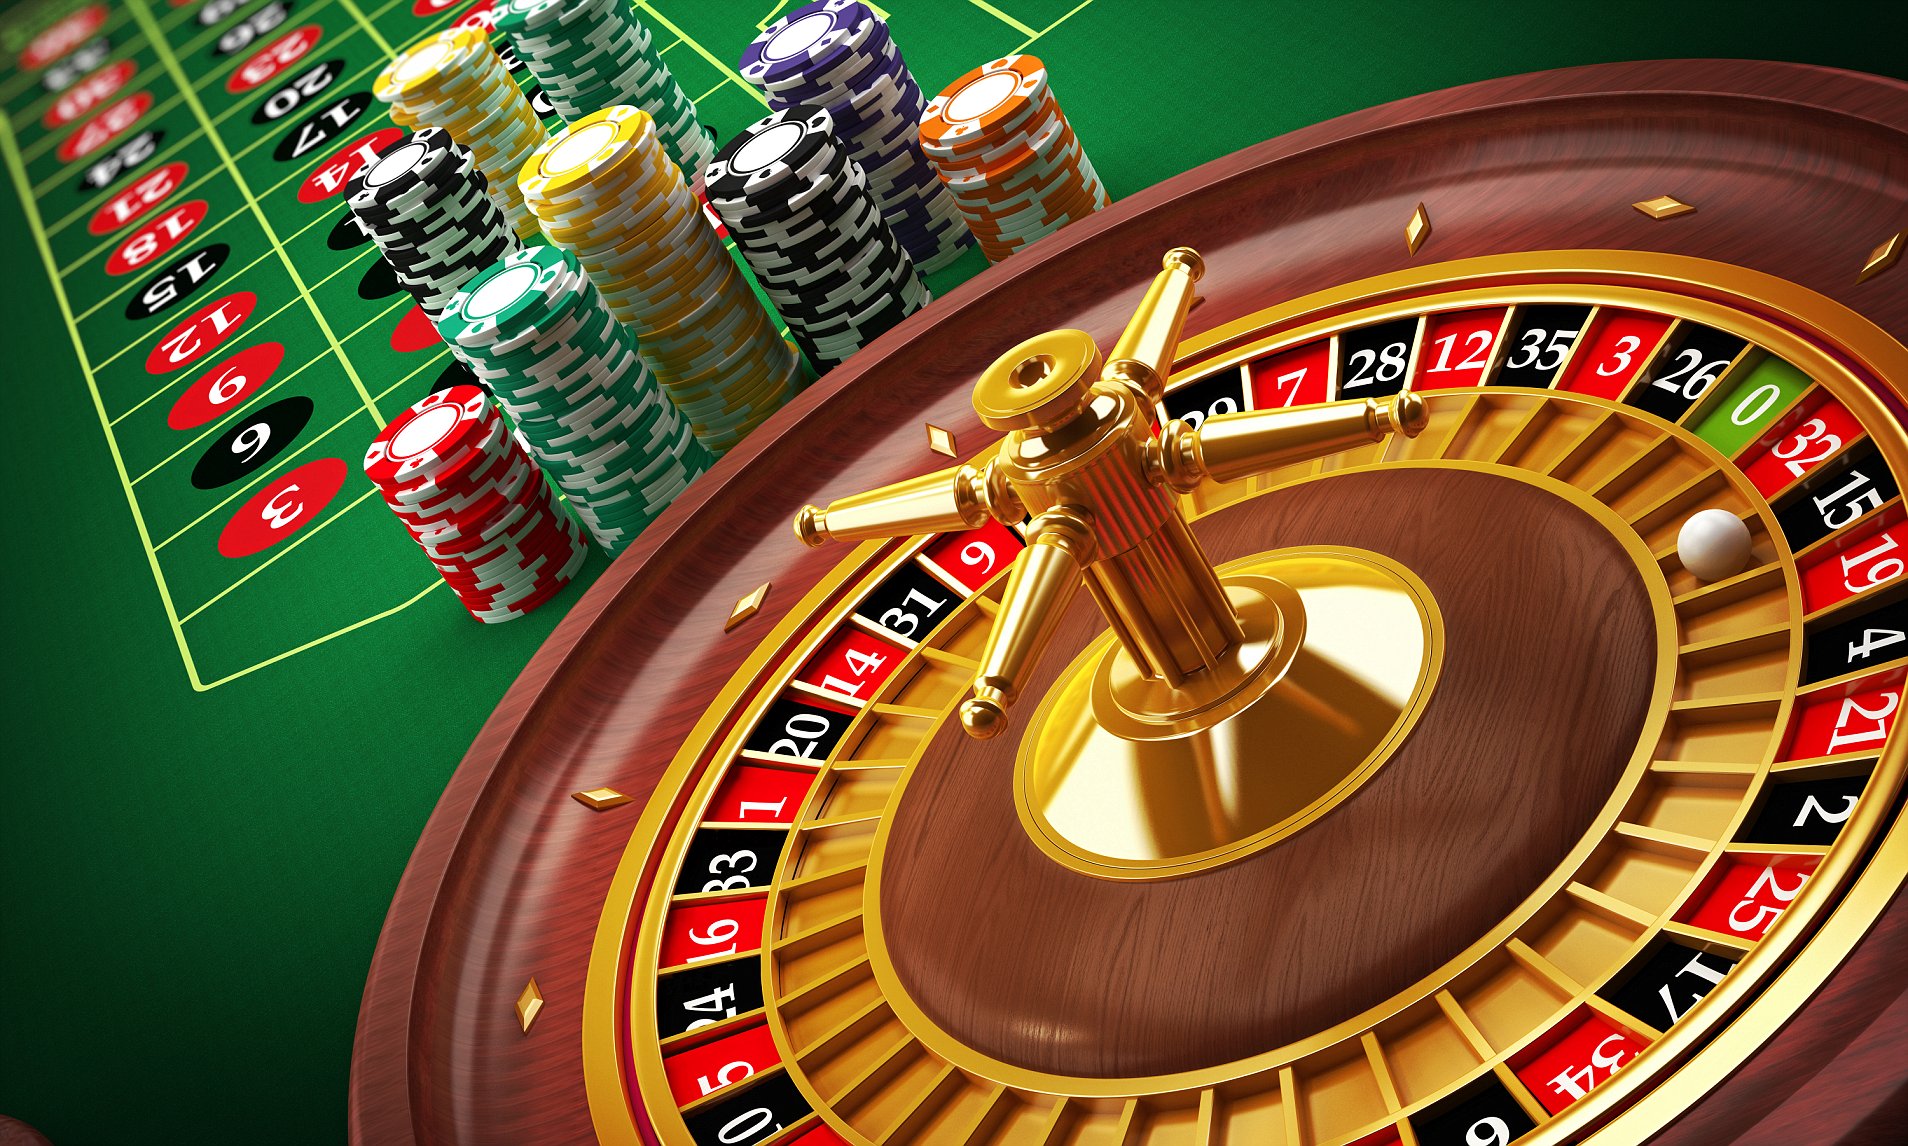 Roulette Betting Systems Mathematics Or Luck